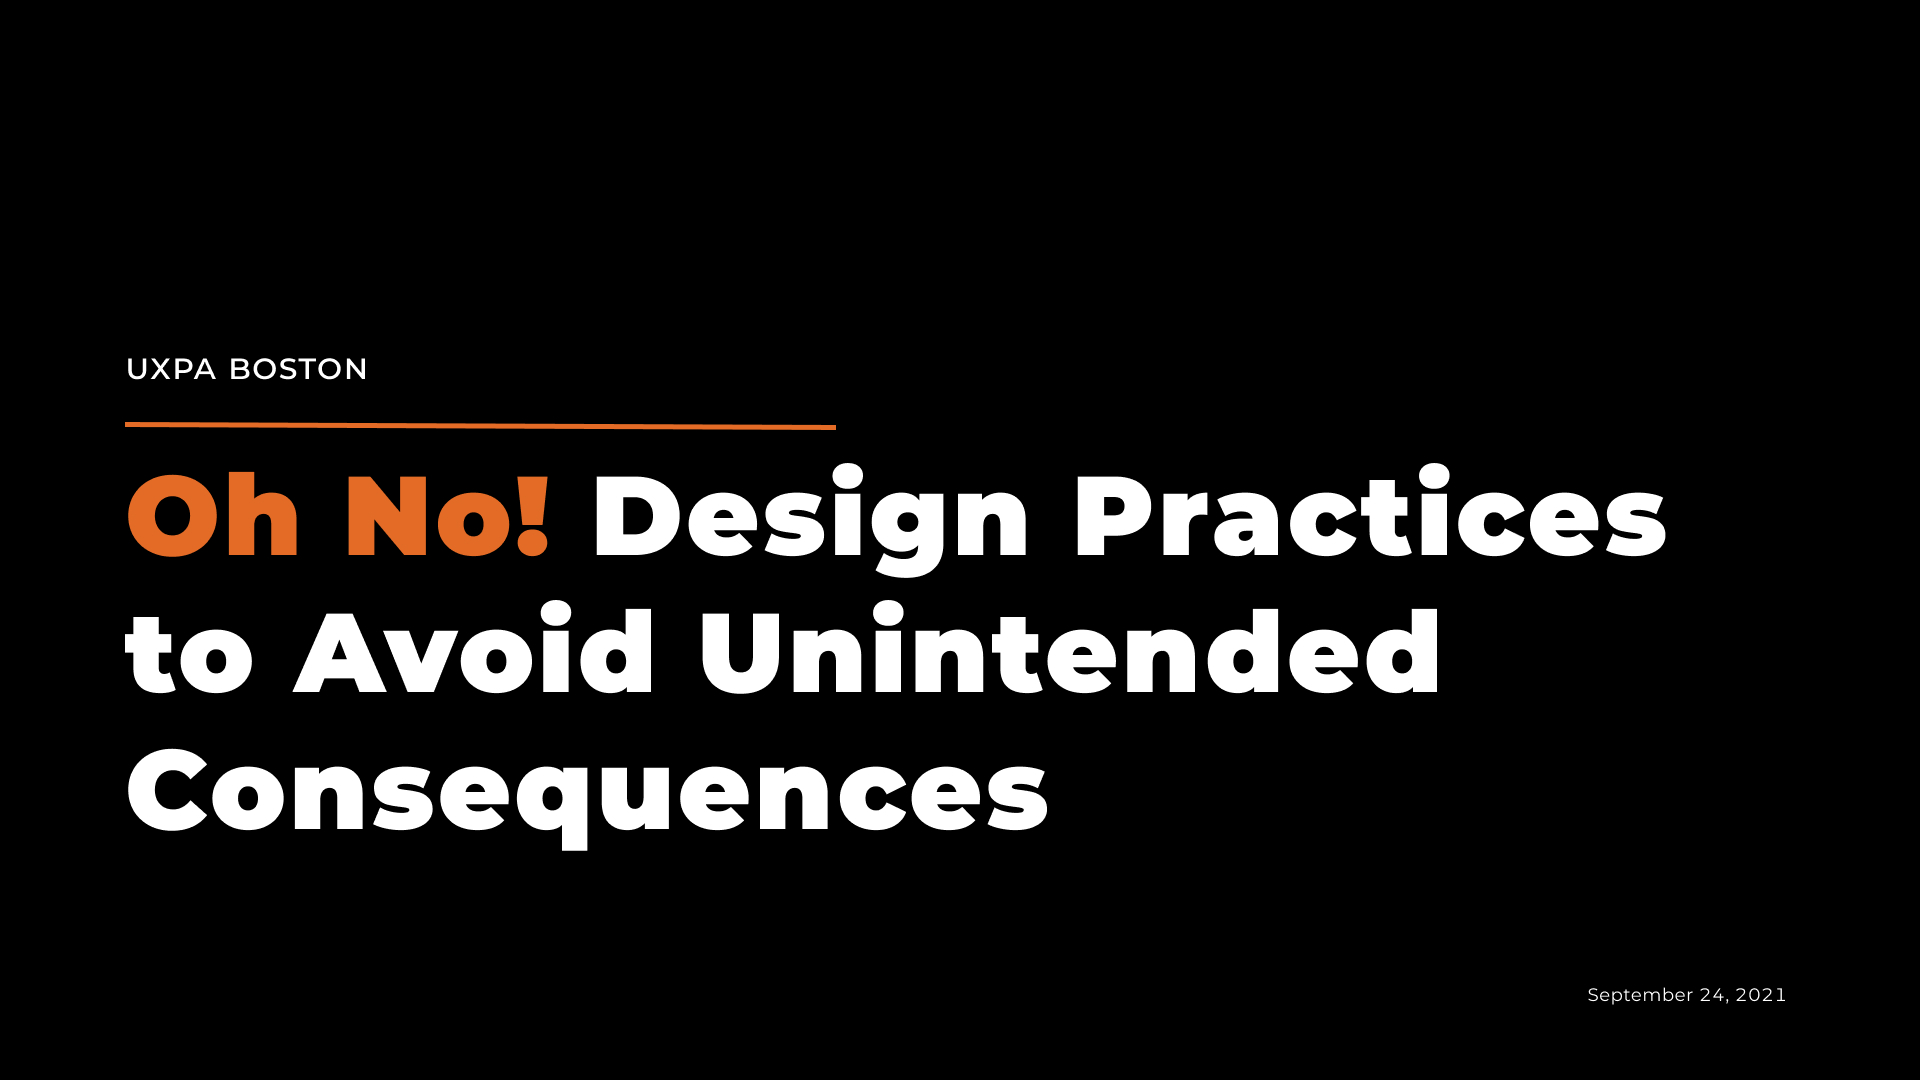 Slide says "Oh, no! Design Practices to avoid unintended consequences"